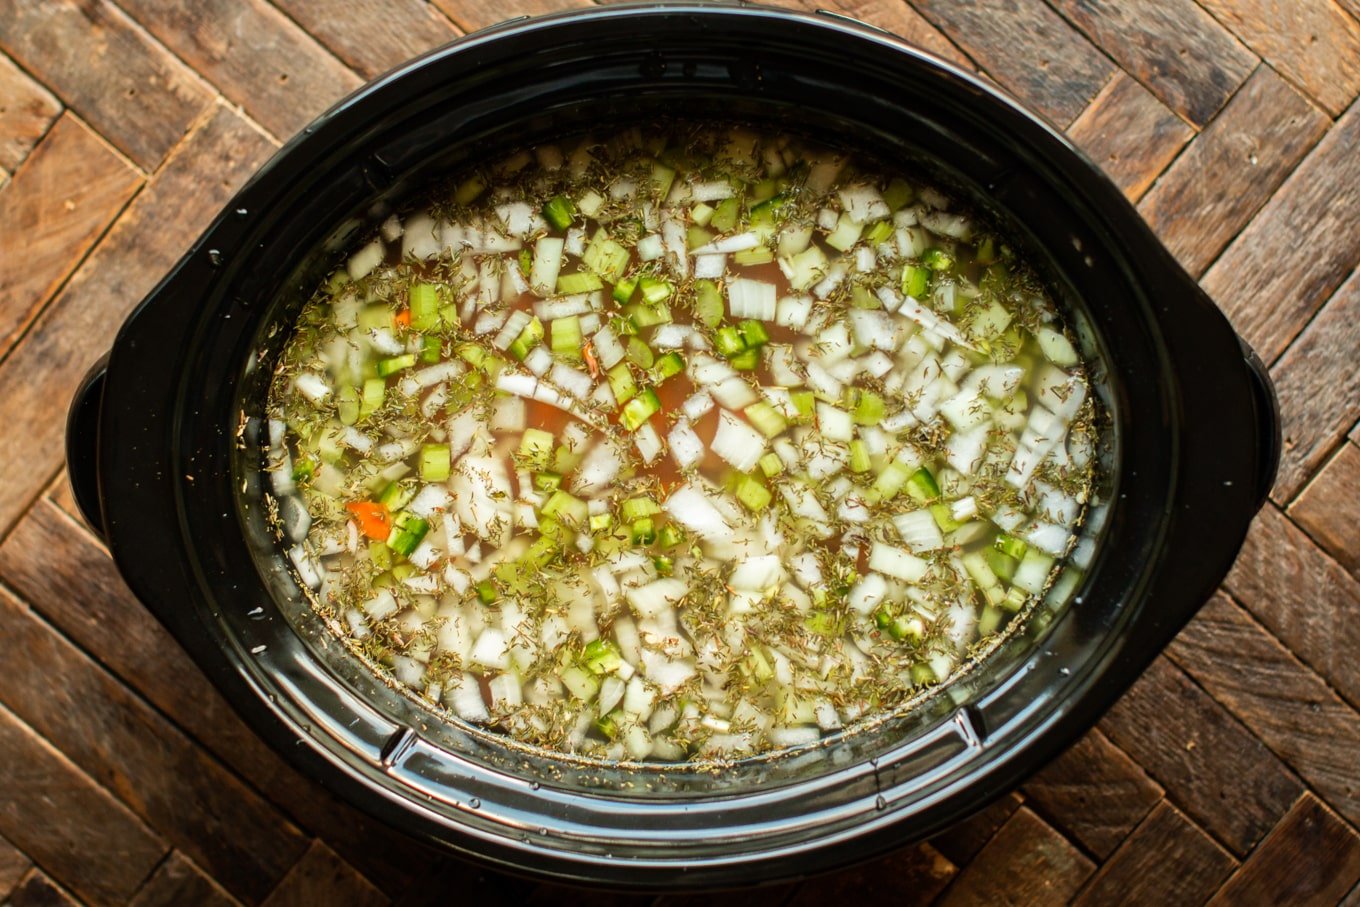 carrots, celery and onion in water in a slow cooker.